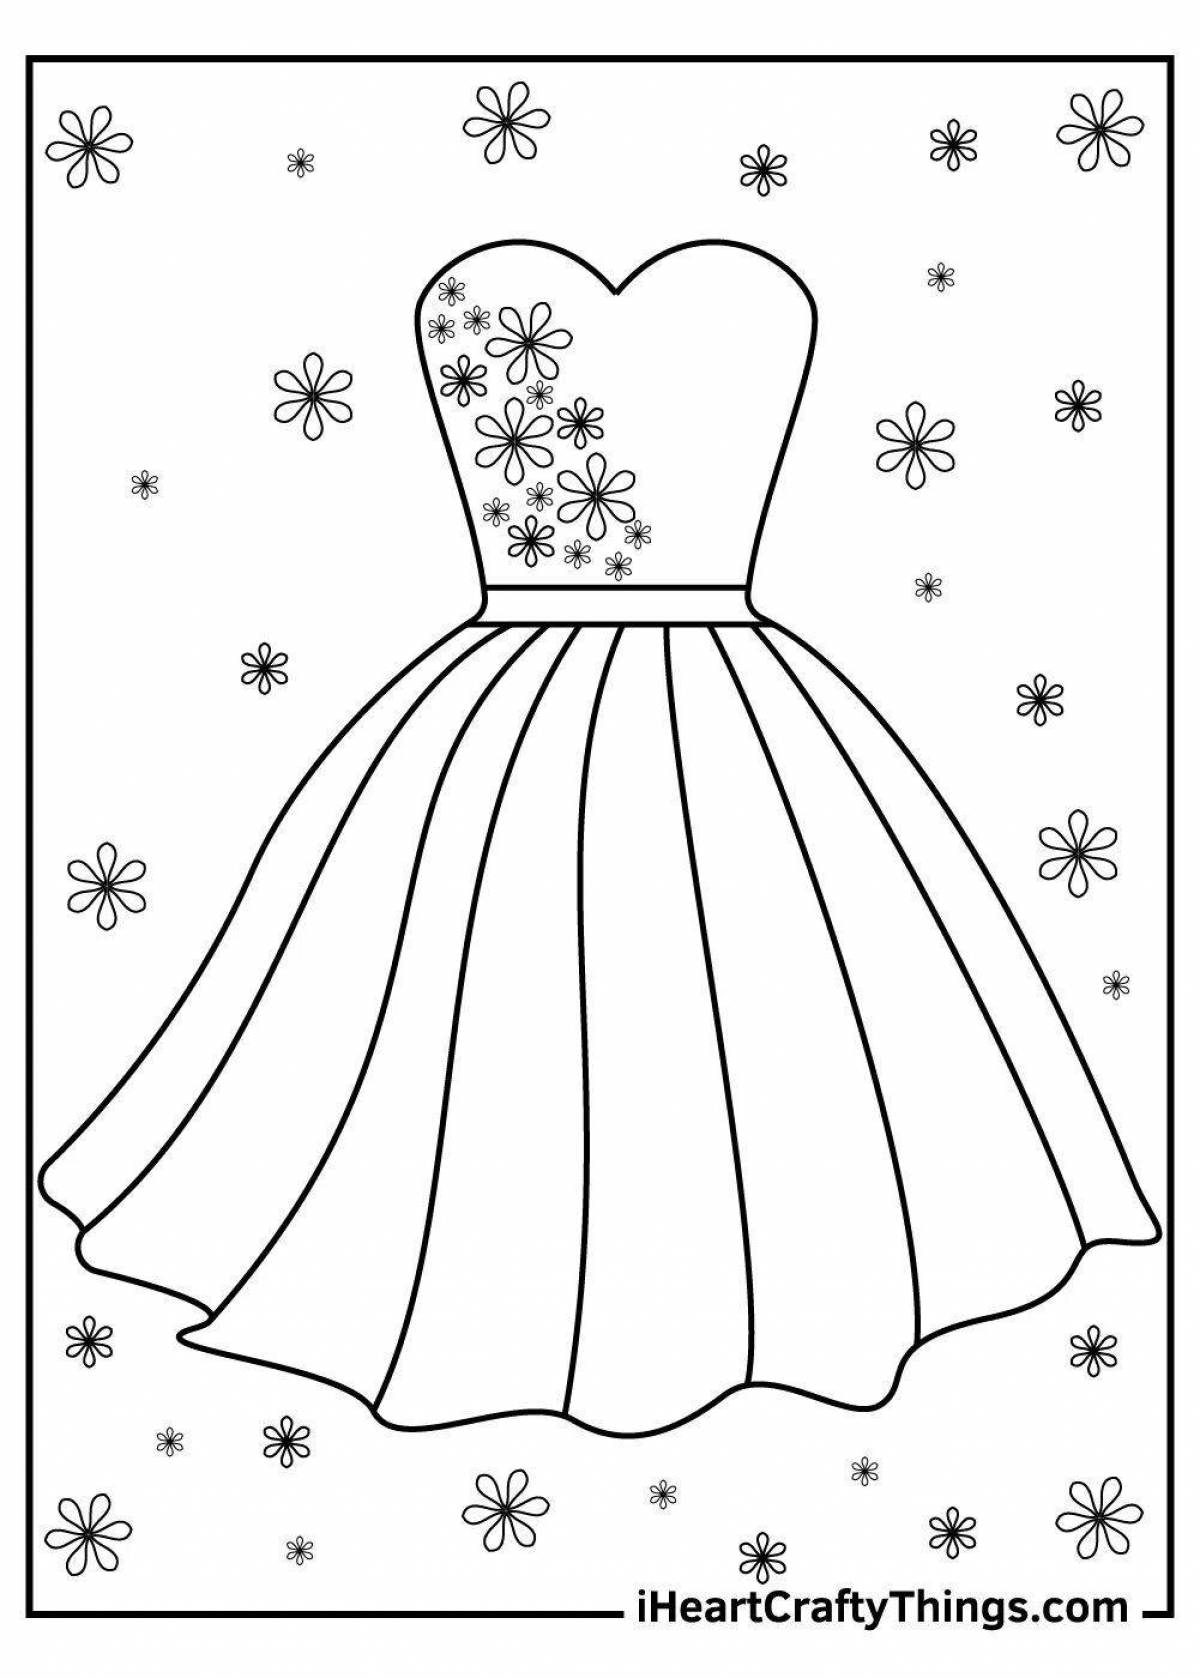 Glitter dress coloring page for children 2-3 years old